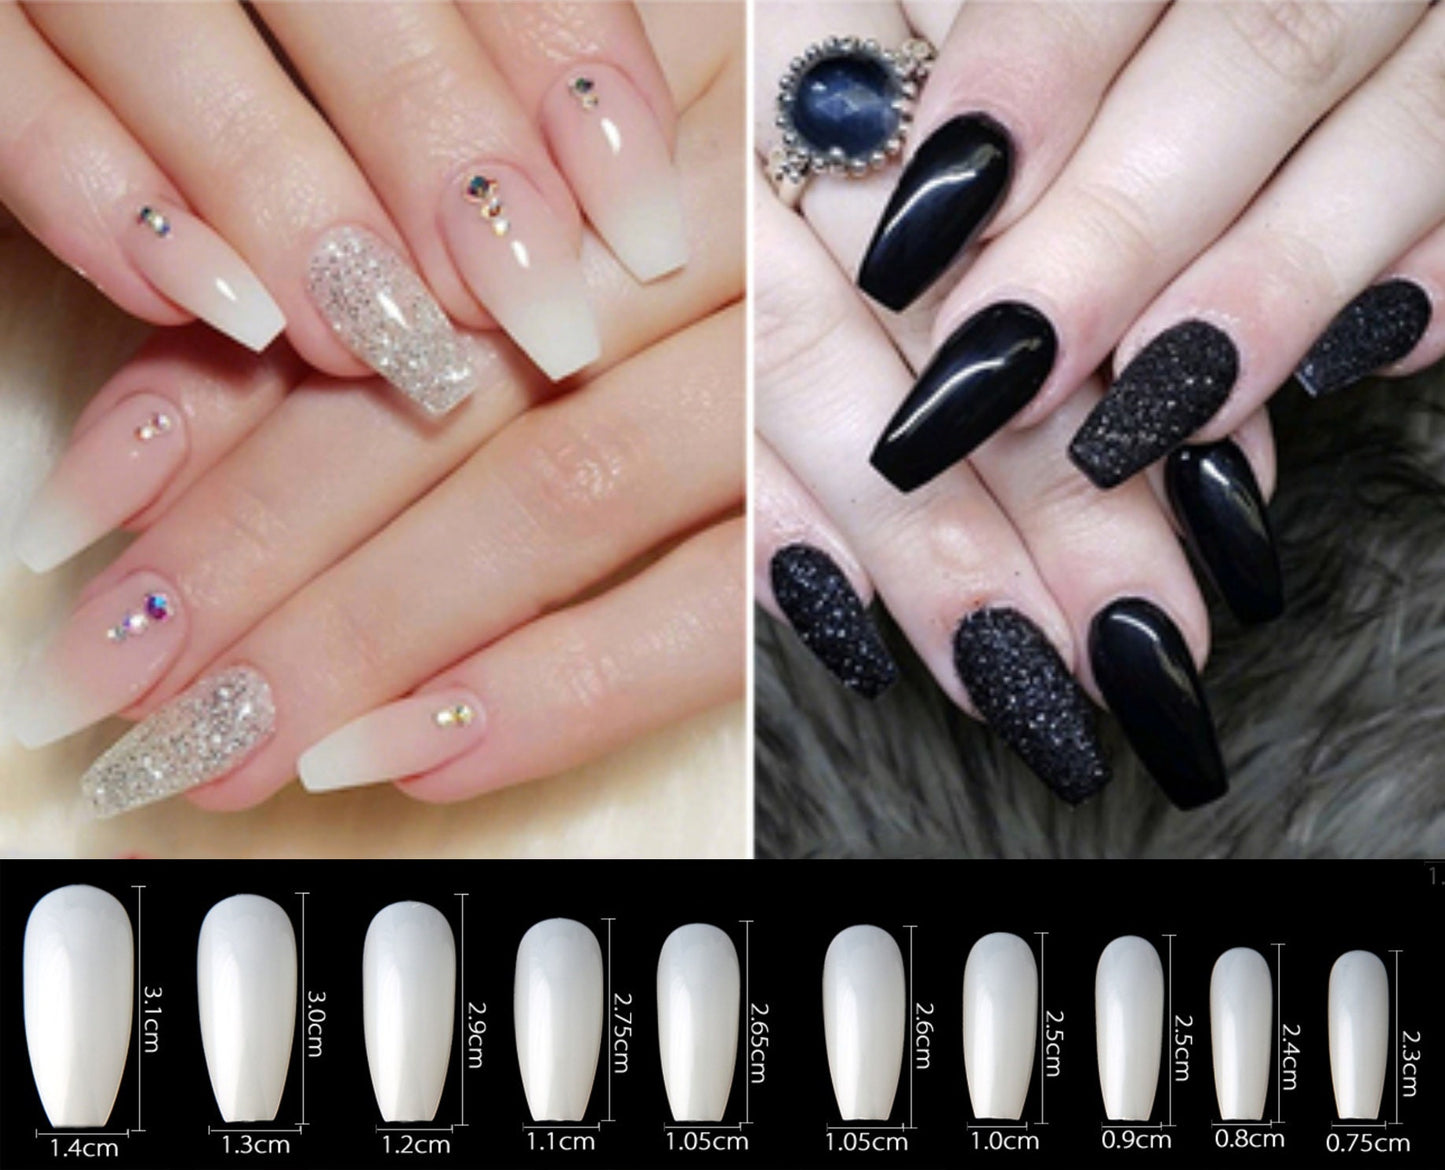 100 pcs Full Cover Coffin False Fake Nails Tips Manicure nail well tips/ White full Acrylic UV Gel Manicure Nail Tips